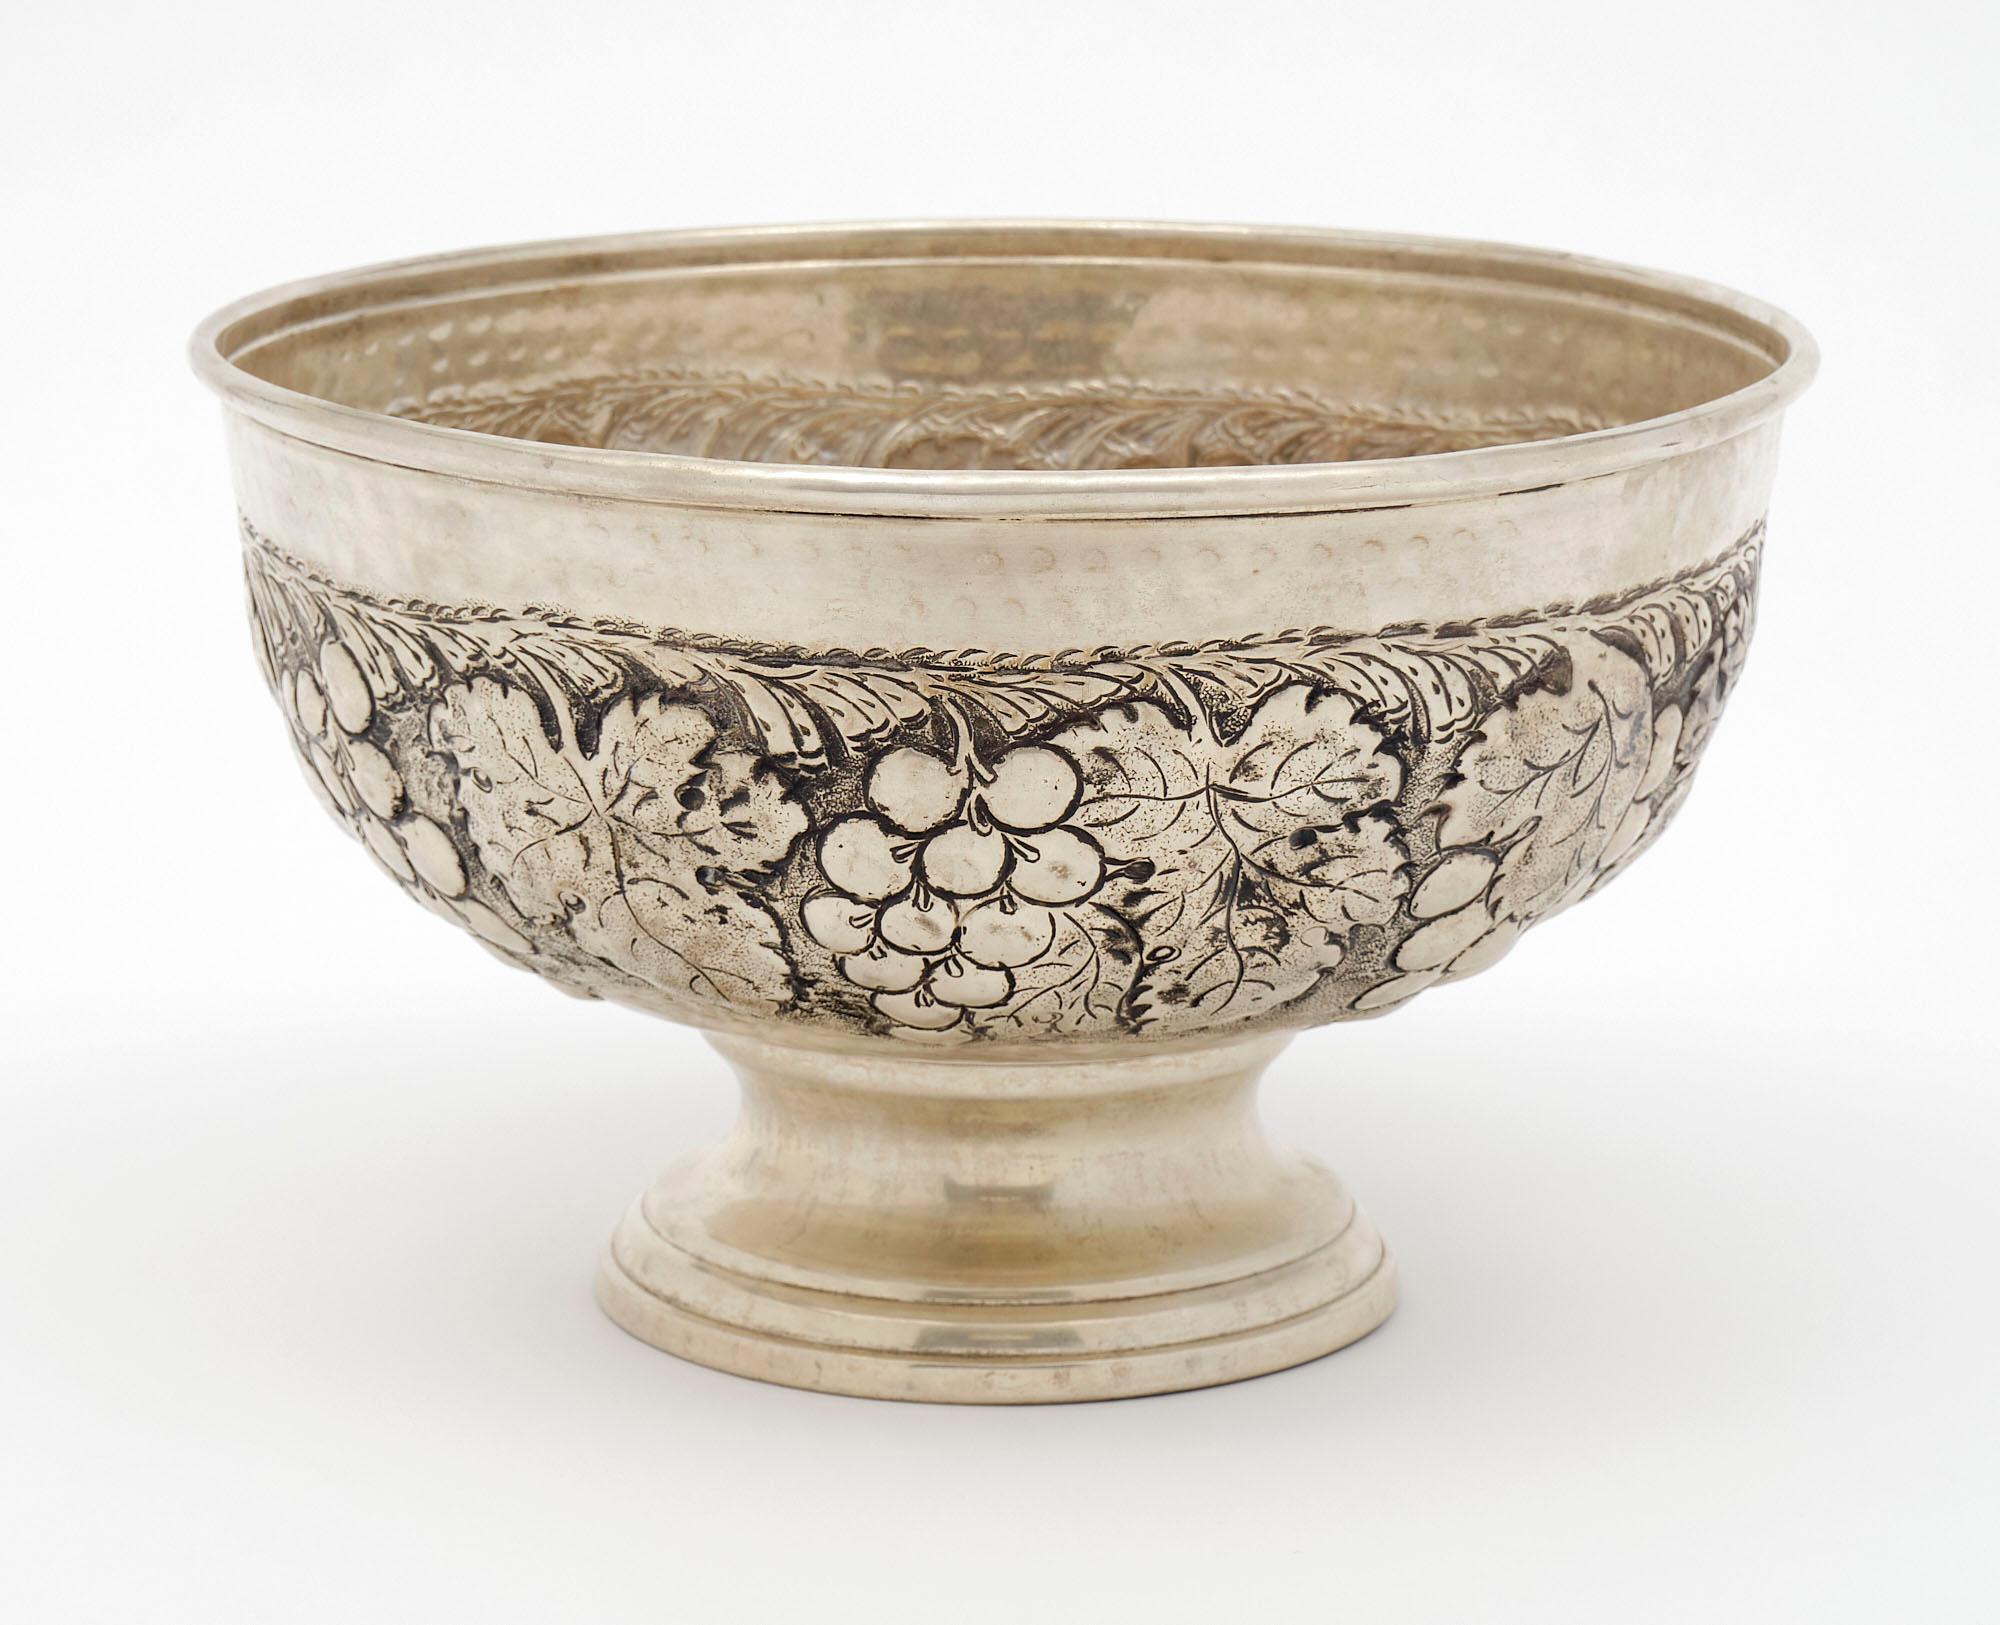 Large wine bucket from France made of embossed silver-plated brass with a rich decor of grapes and grape wine leaves.